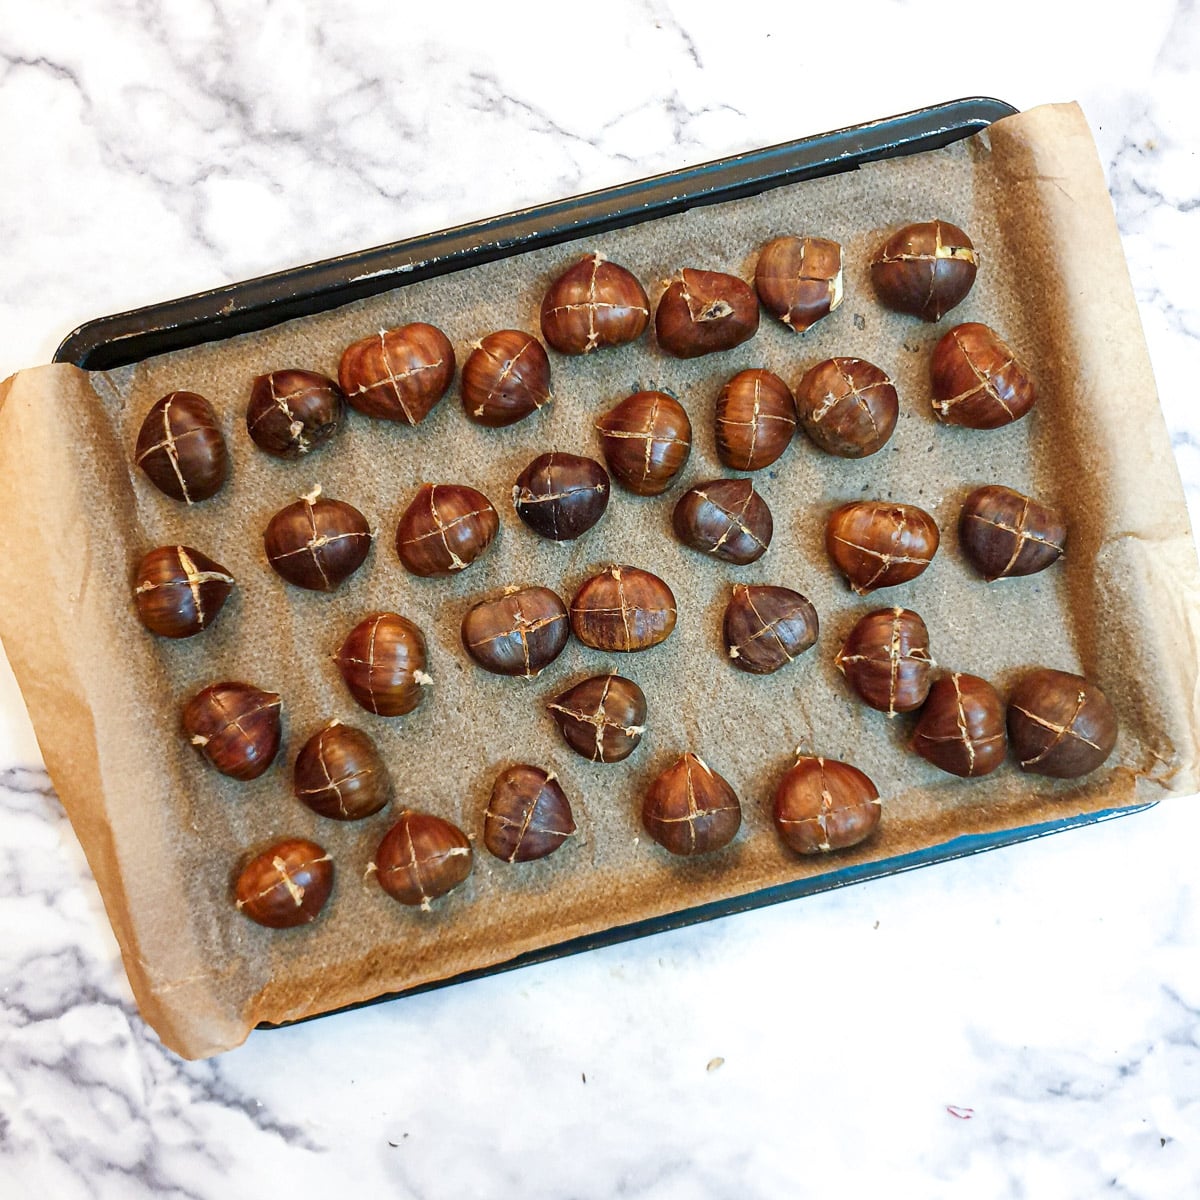 Prepared chestnuts on a baking tray.